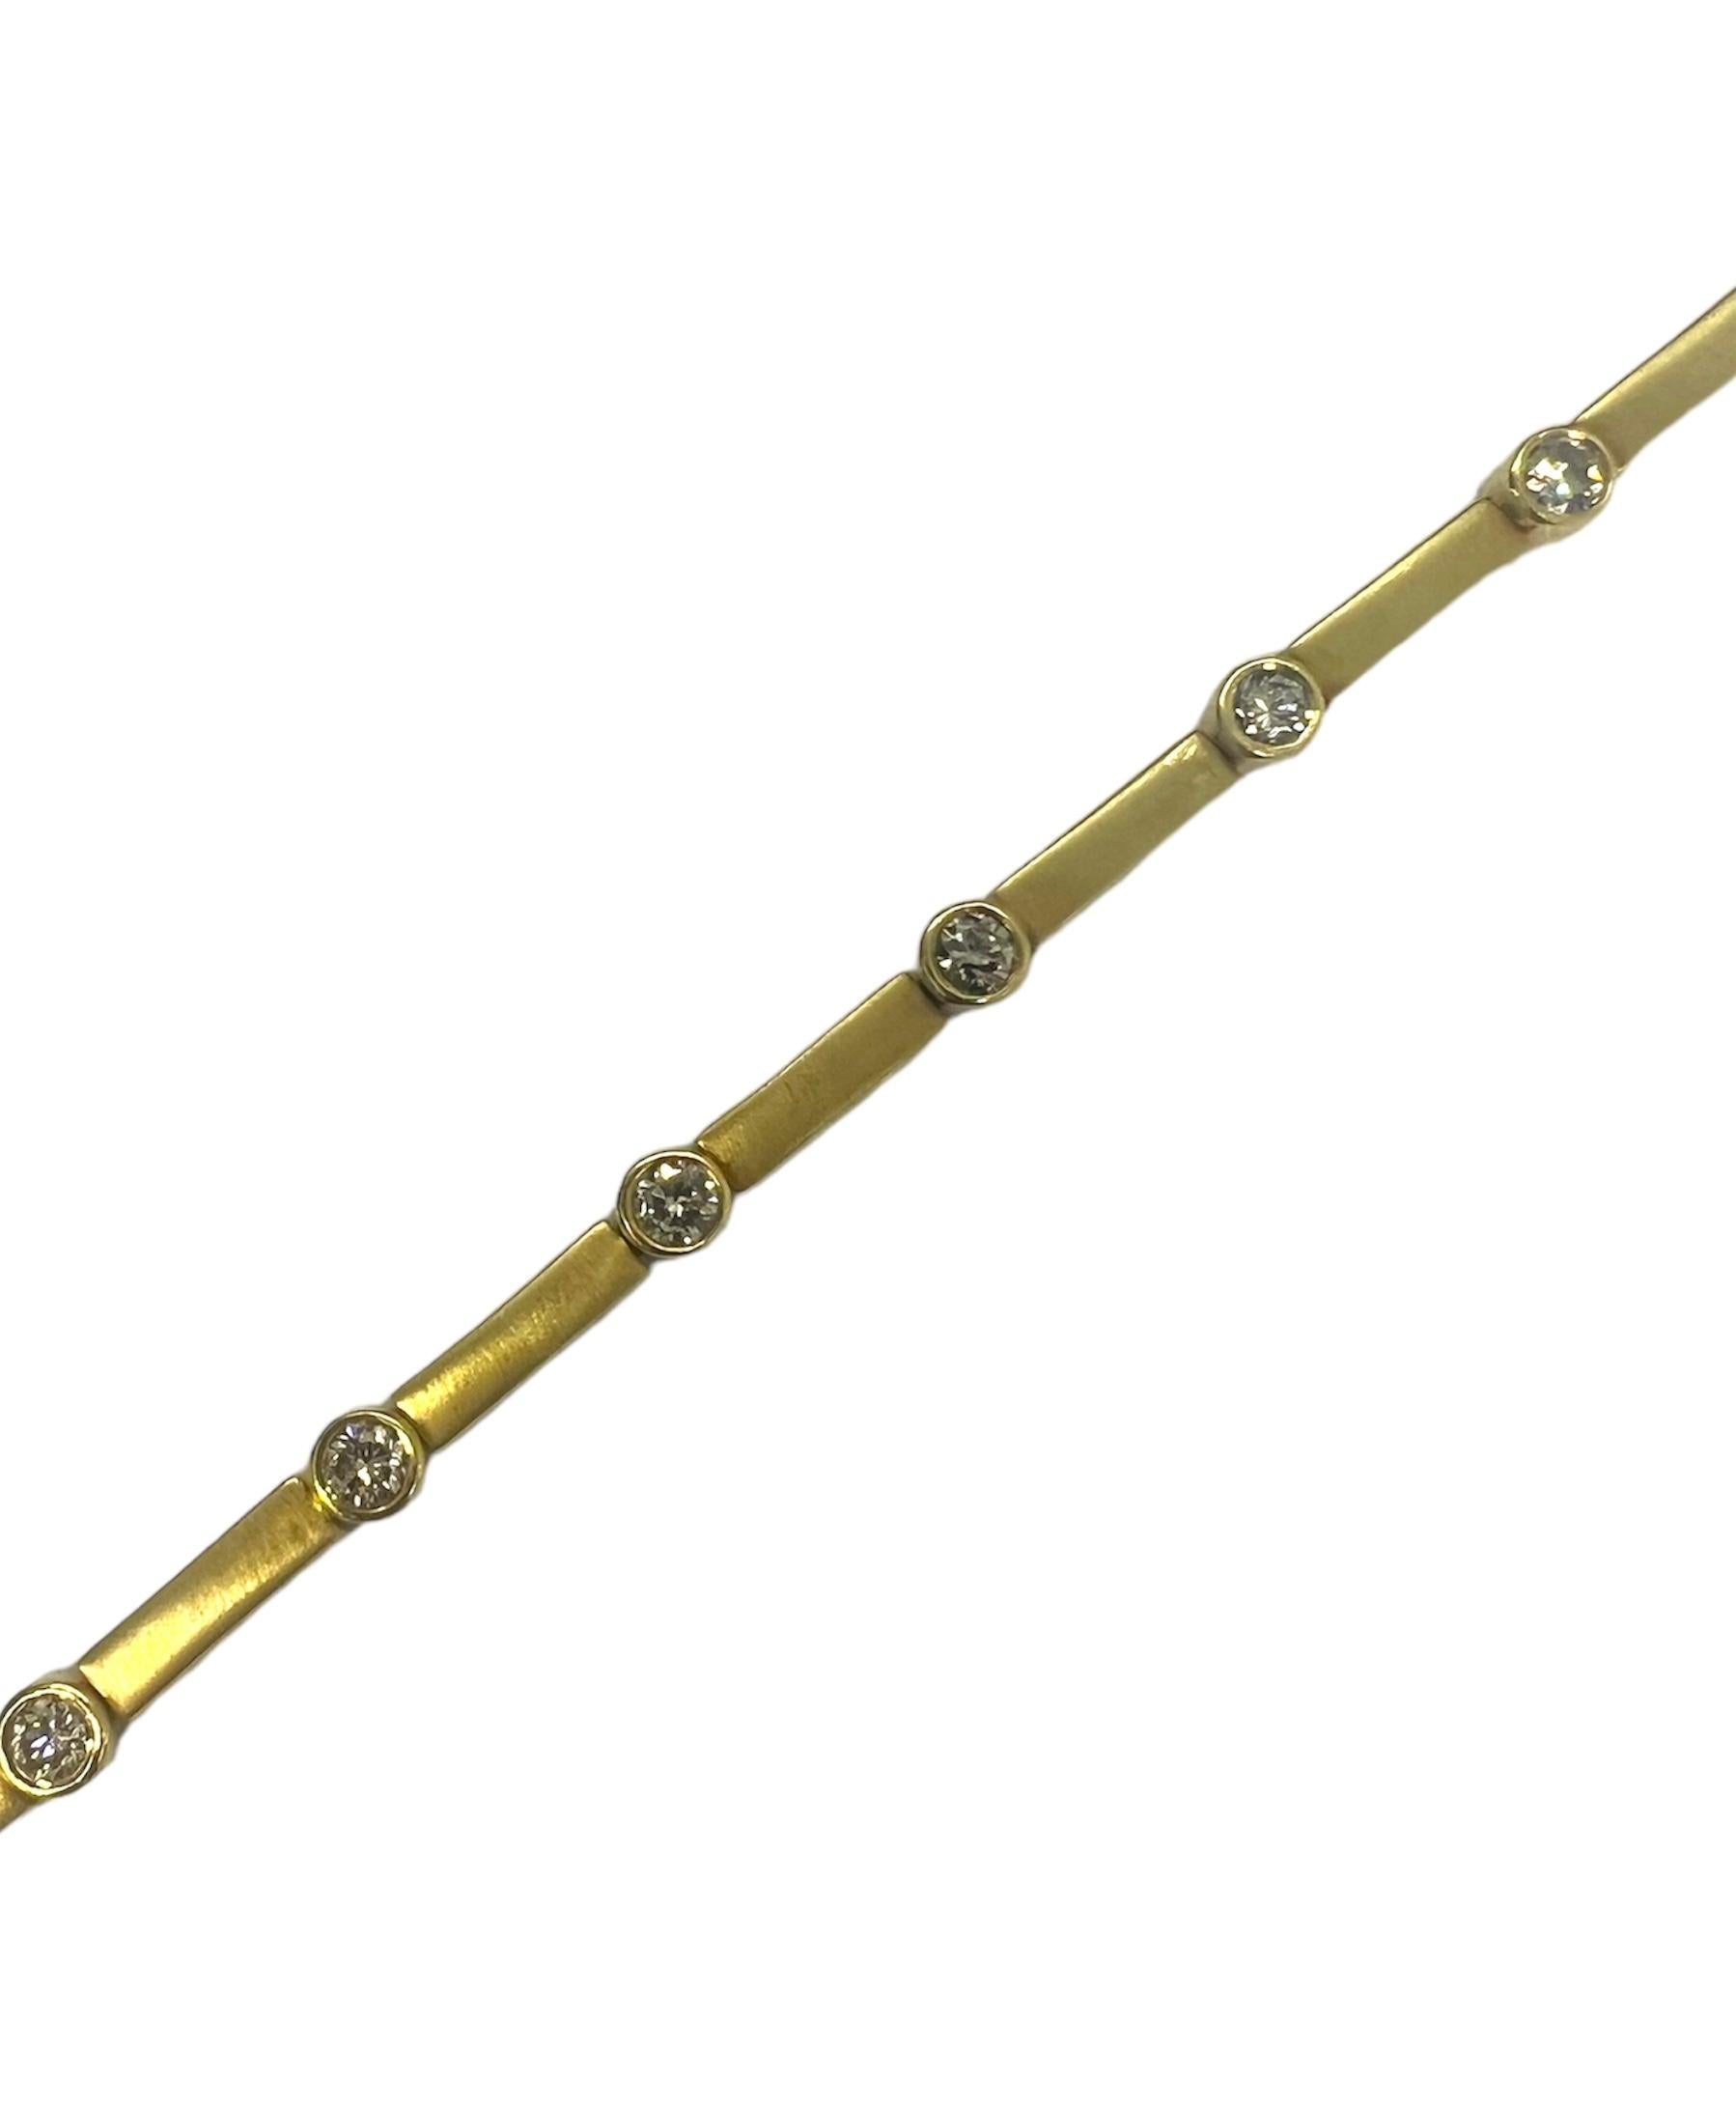 A 14K yellow gold bracelet with round diamonds.

Sophia D by Joseph Dardashti LTD has been known worldwide for 35 years and are inspired by classic Art Deco design that merges with modern manufacturing techniques.
